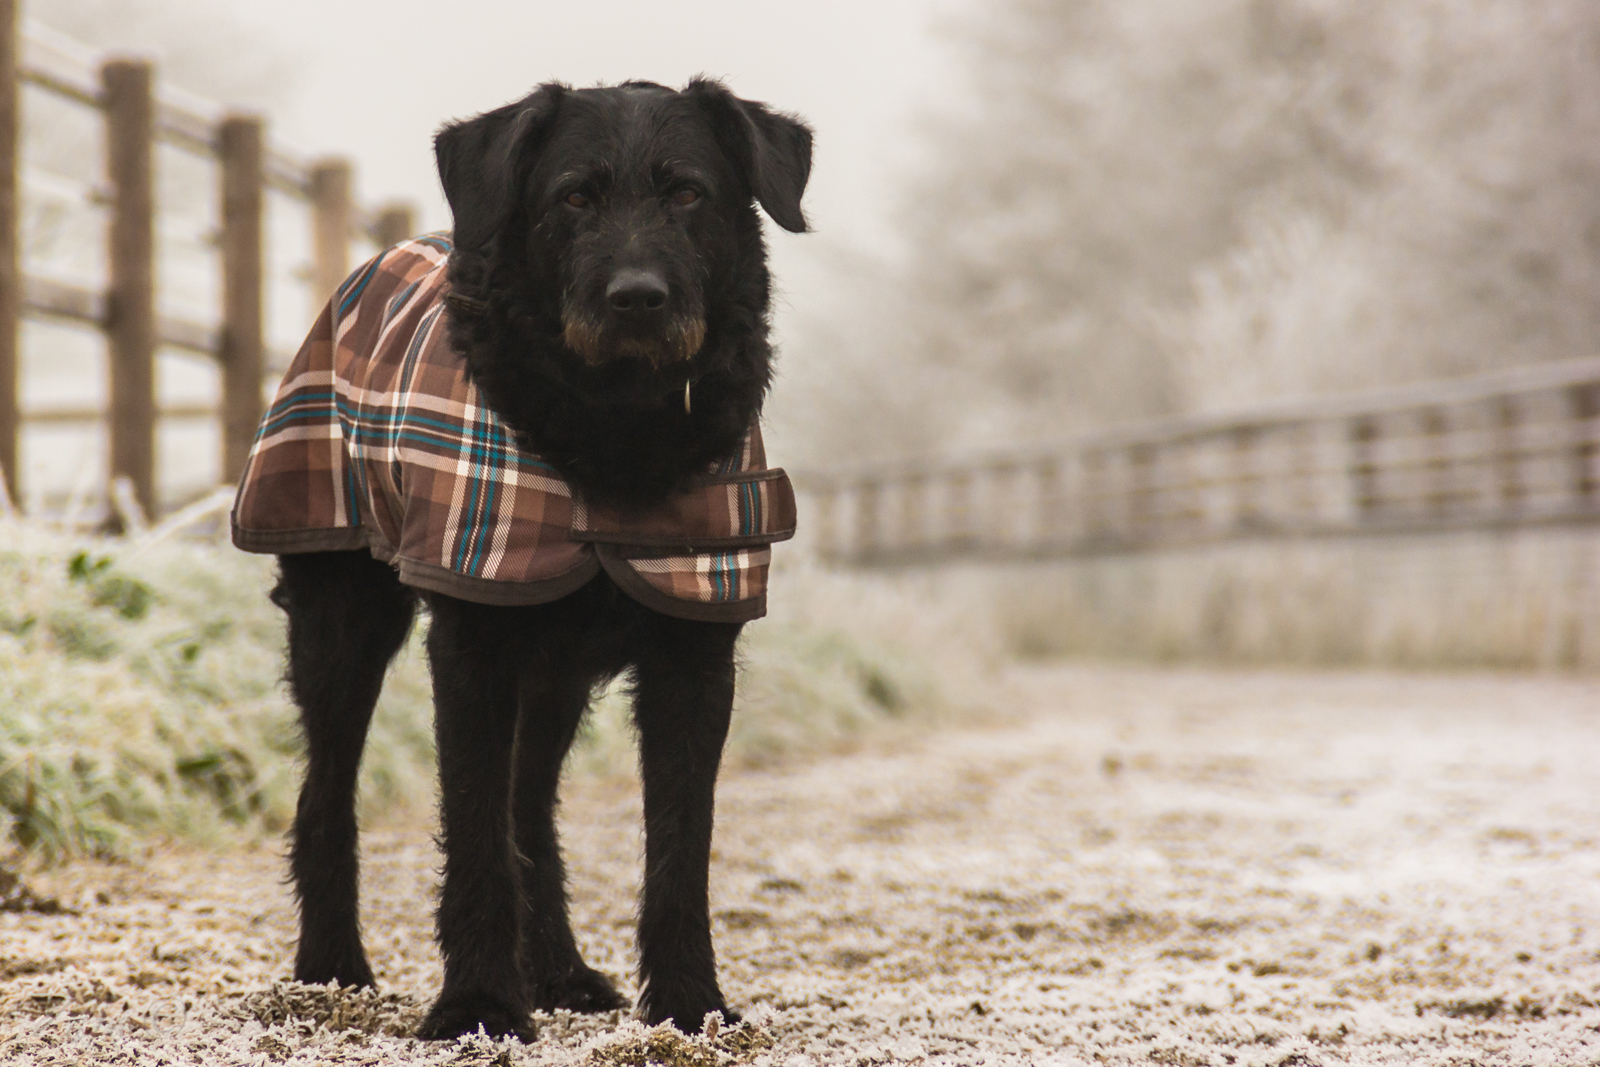 A dog standing in a coat on a frosty lane